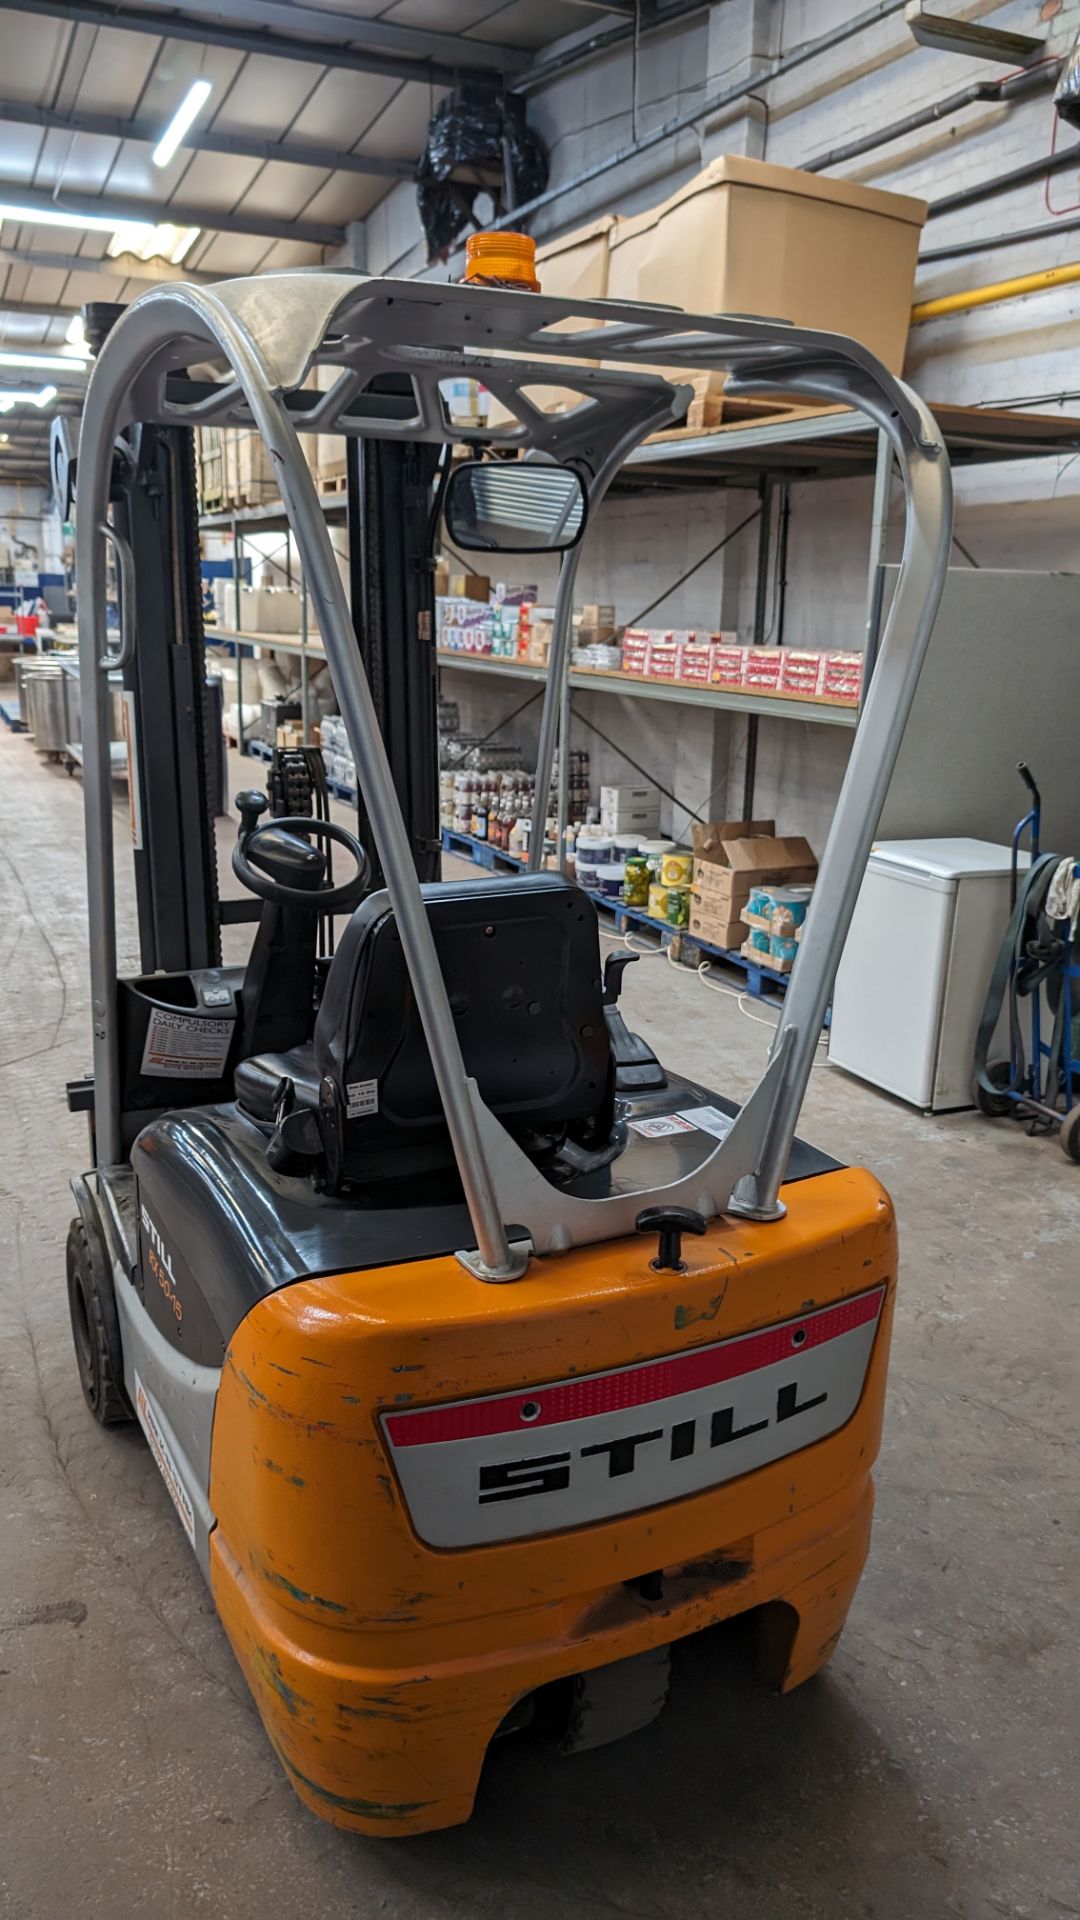 Still model RX-5015 3-wheel electric forklift truck with sideshift, 1.5 tonne capacity, including St - Image 17 of 18